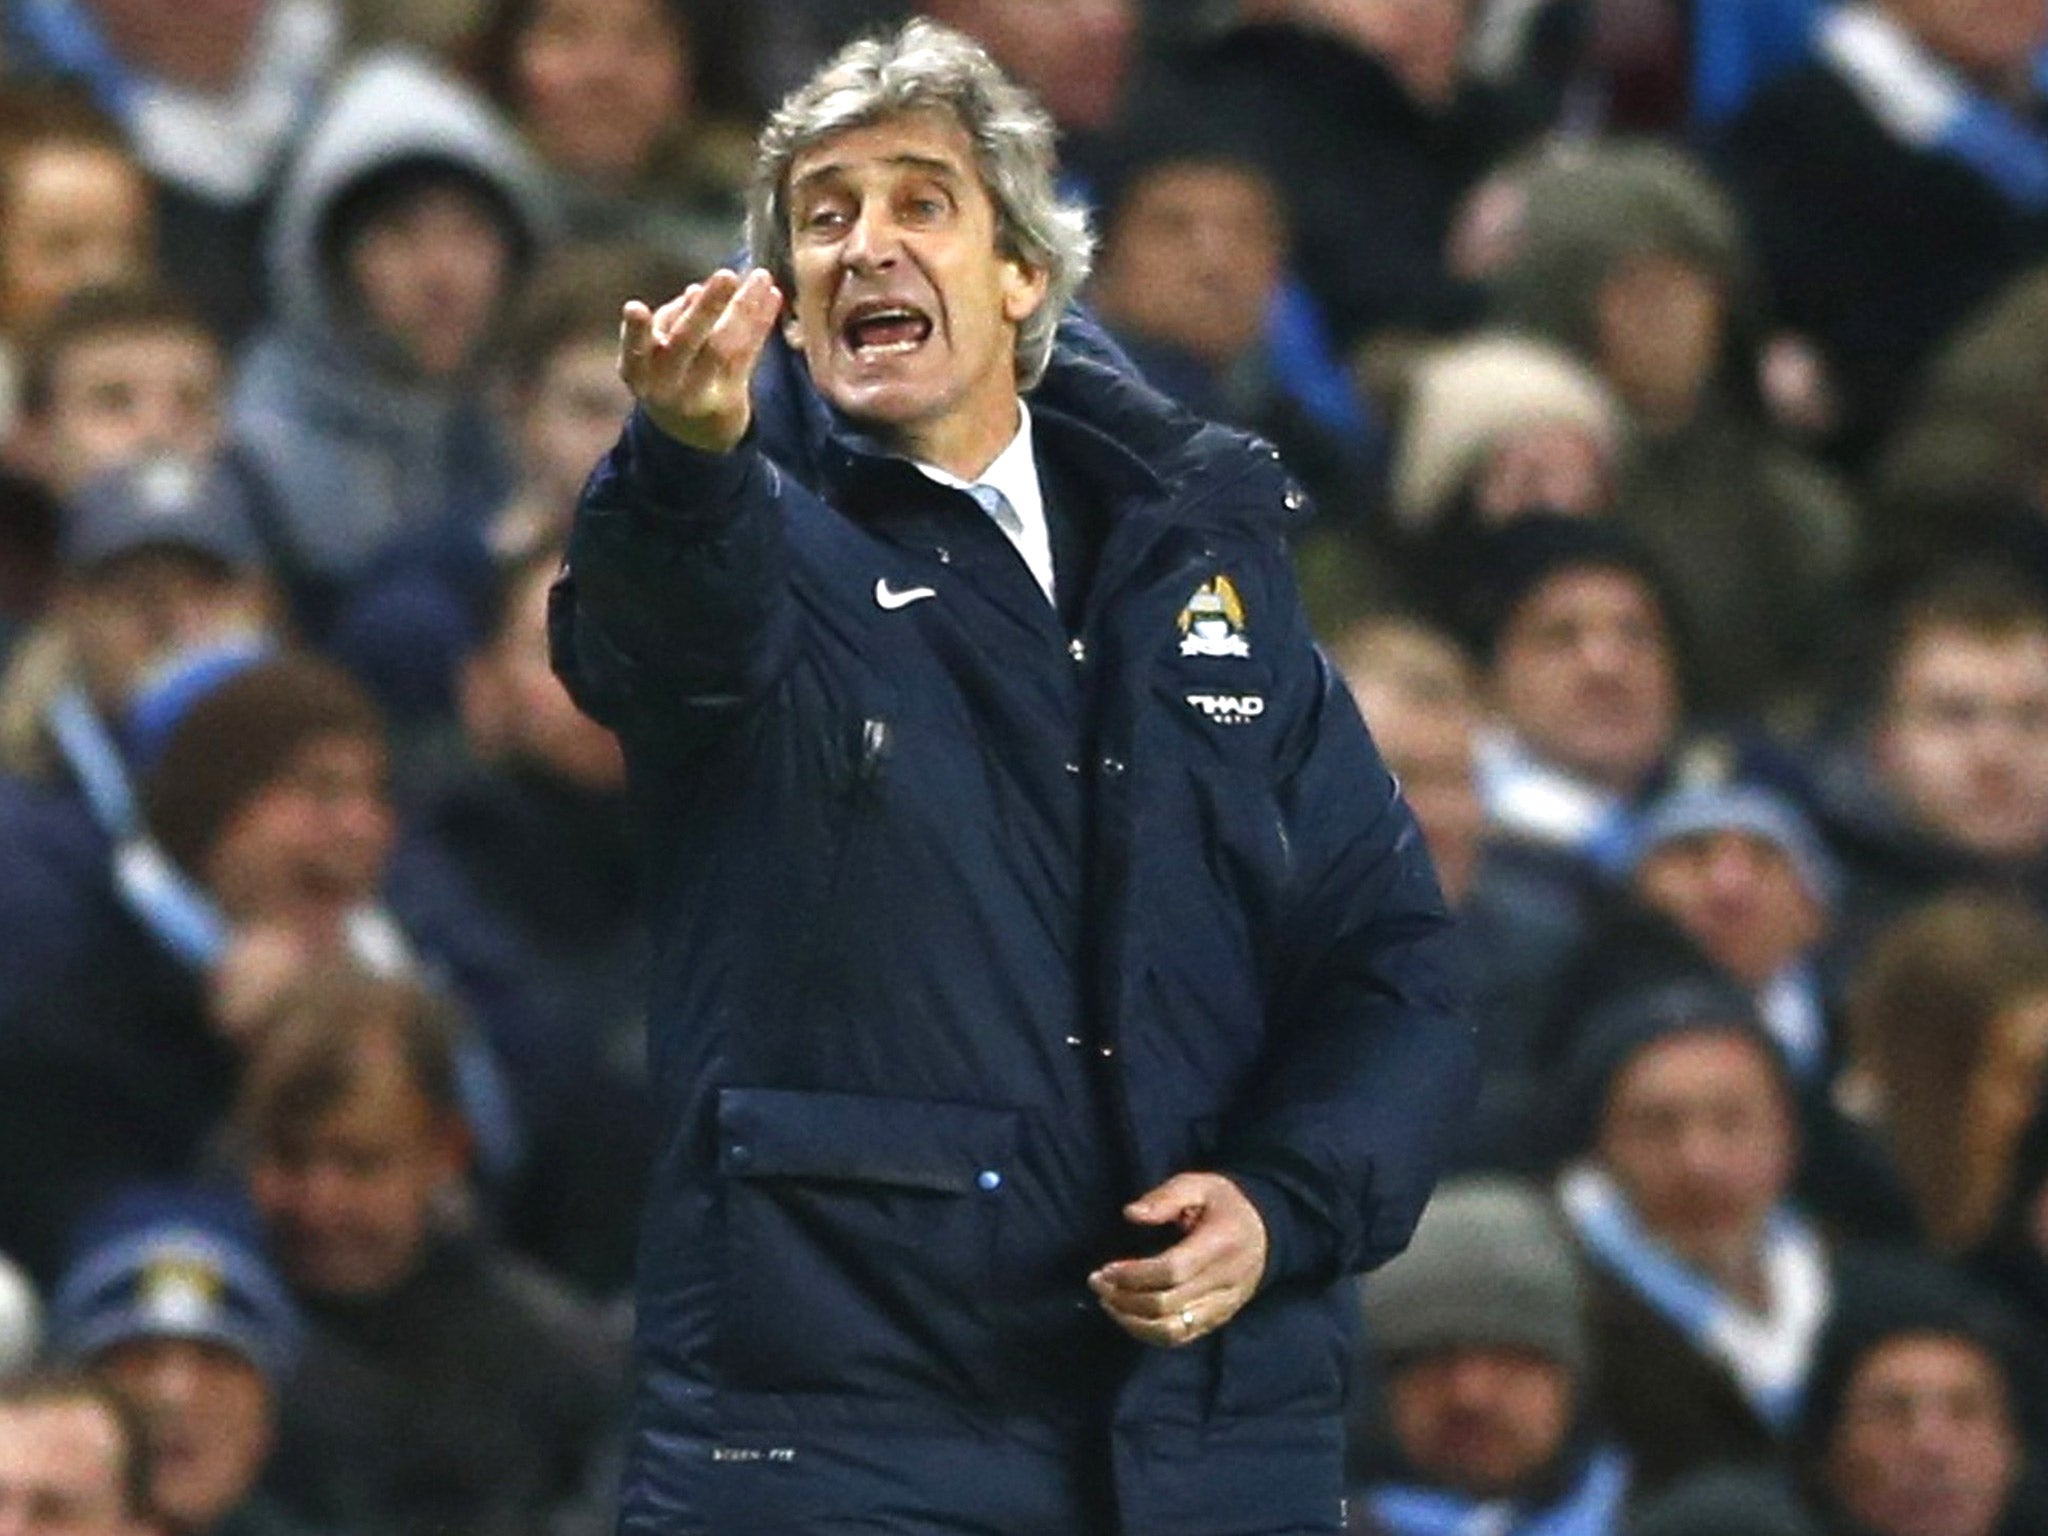 Manuel Pellegrini and his Manchester City side face